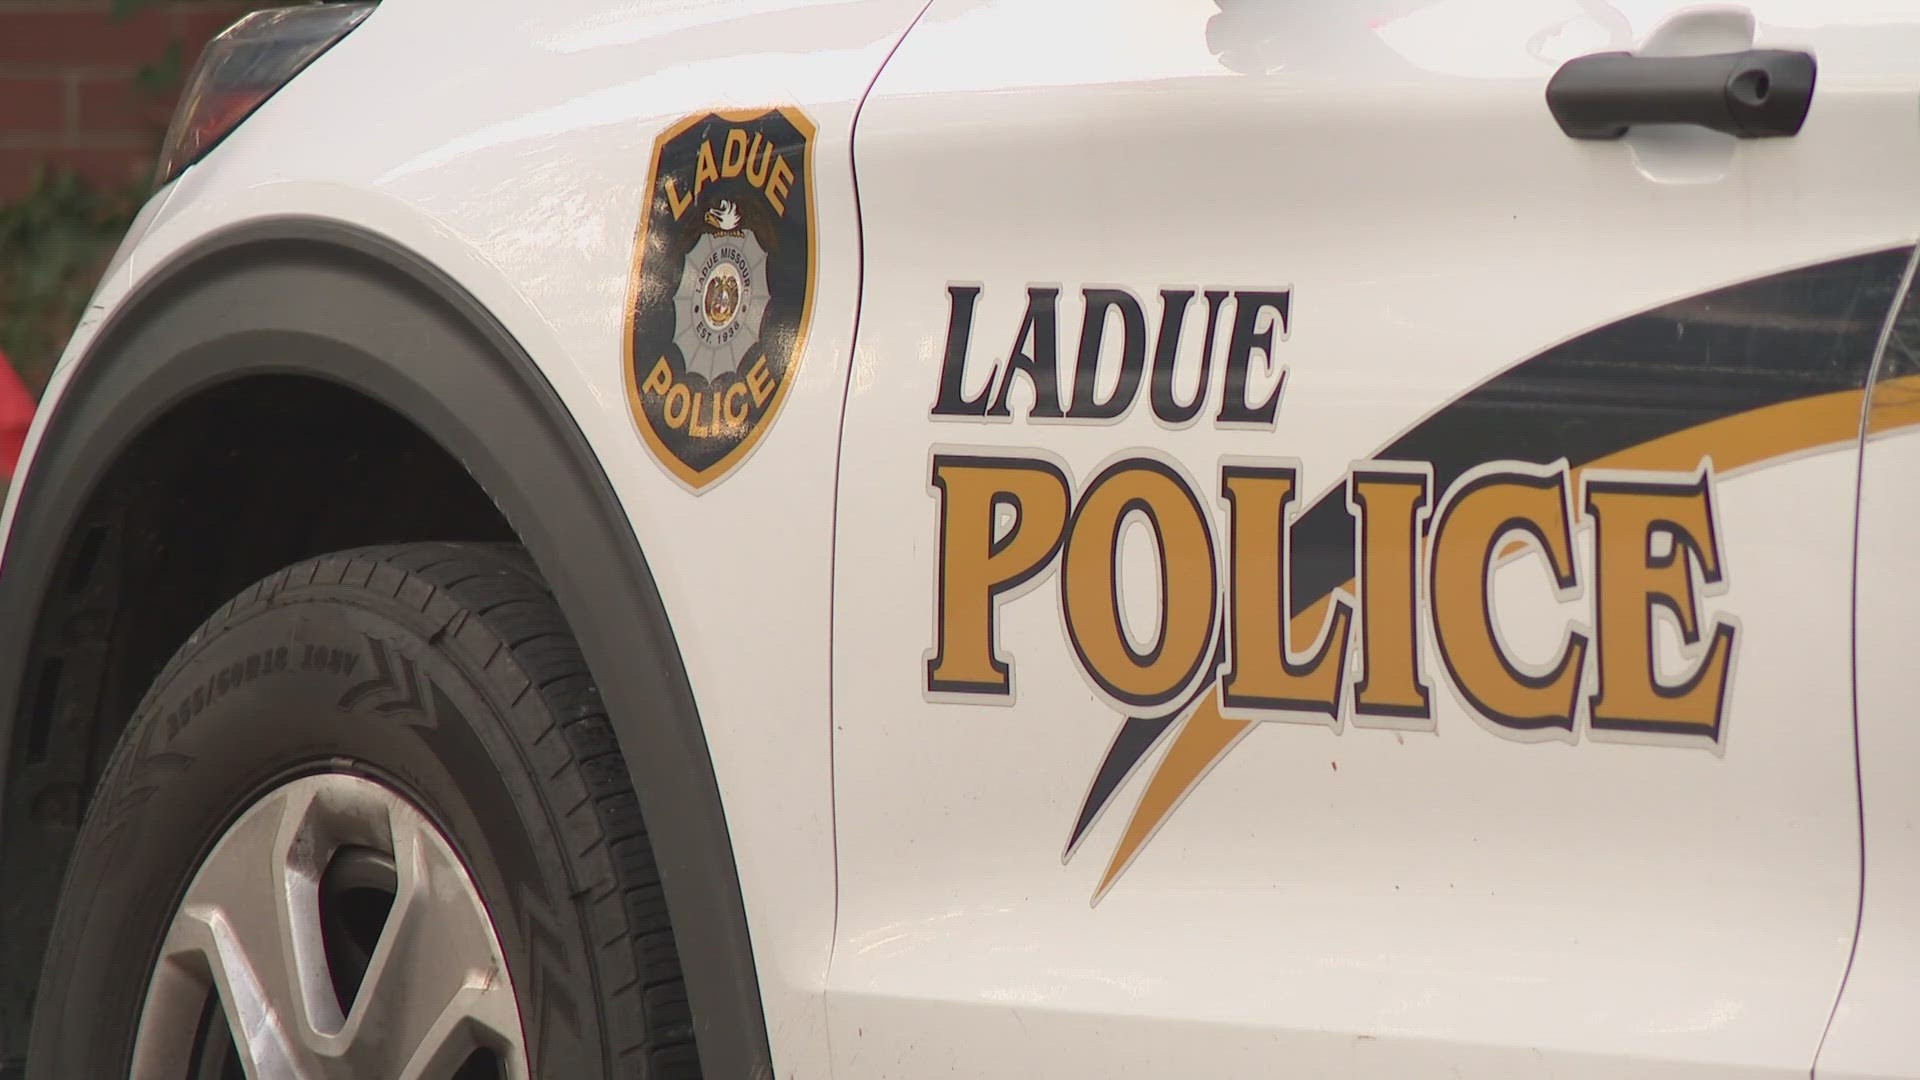 Two suspects were arrested in connection to an attempted carjacking in Ladue. The arrests came after a police chase that ended in Jennings.